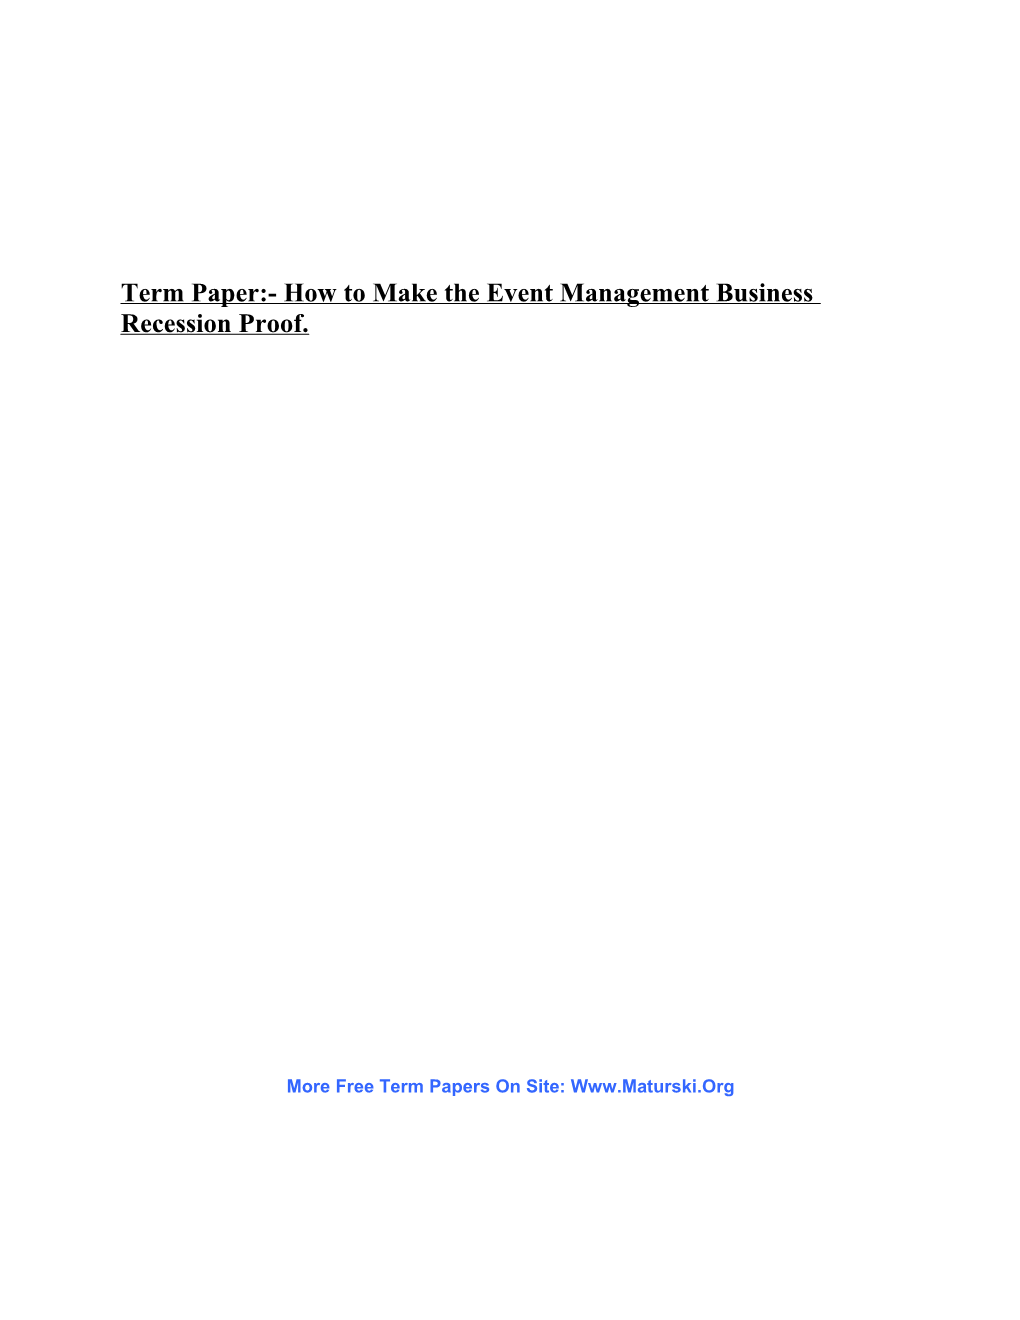 Term Paper:- How to Make the Event Management Business Recession Proof